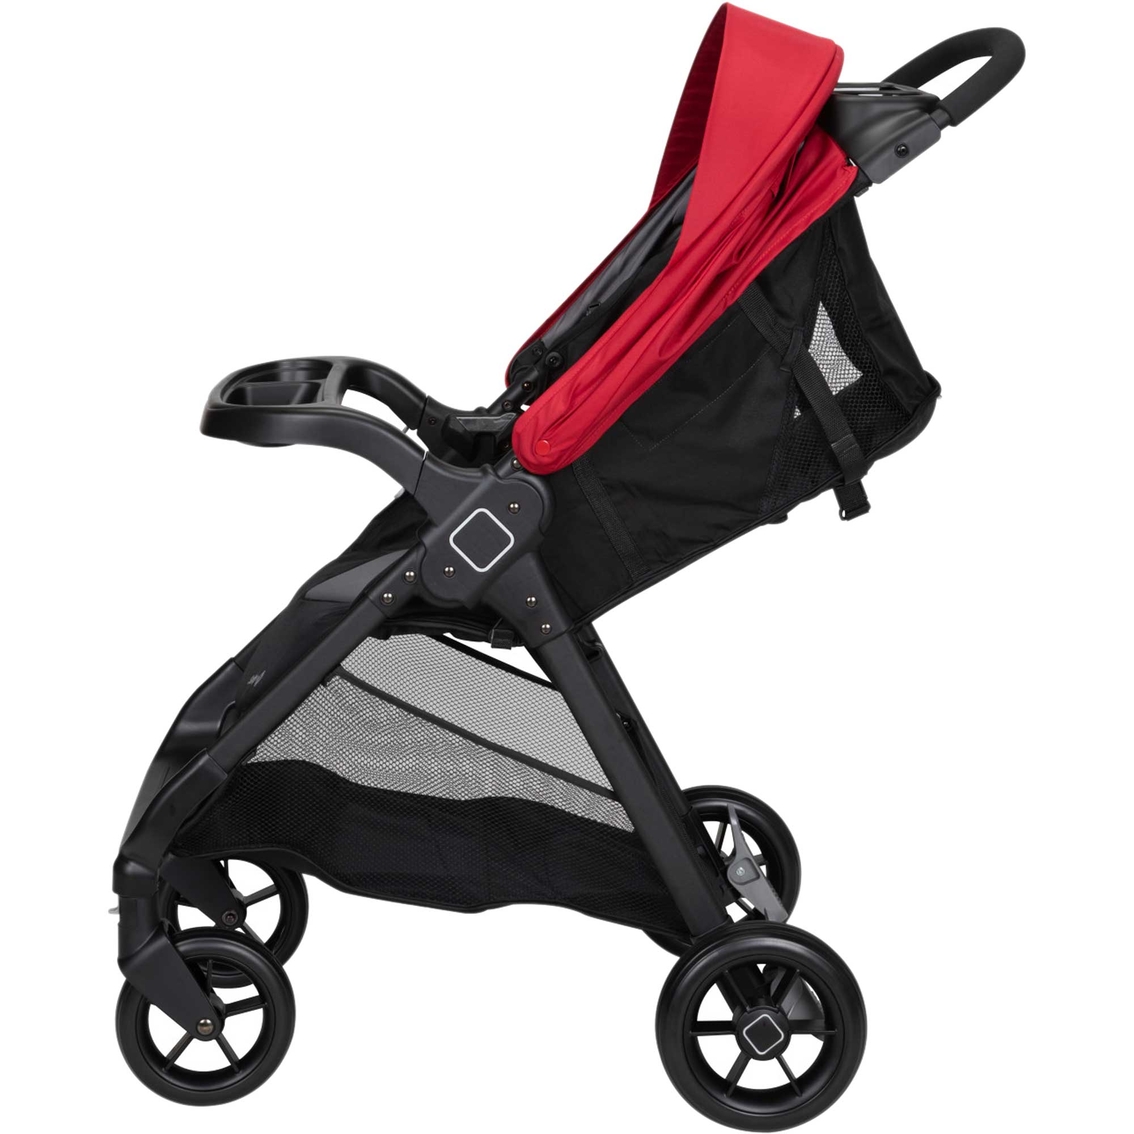 Safety 1st Smooth Ride Travel System Stroller and Infant Car Seat - Image 6 of 10